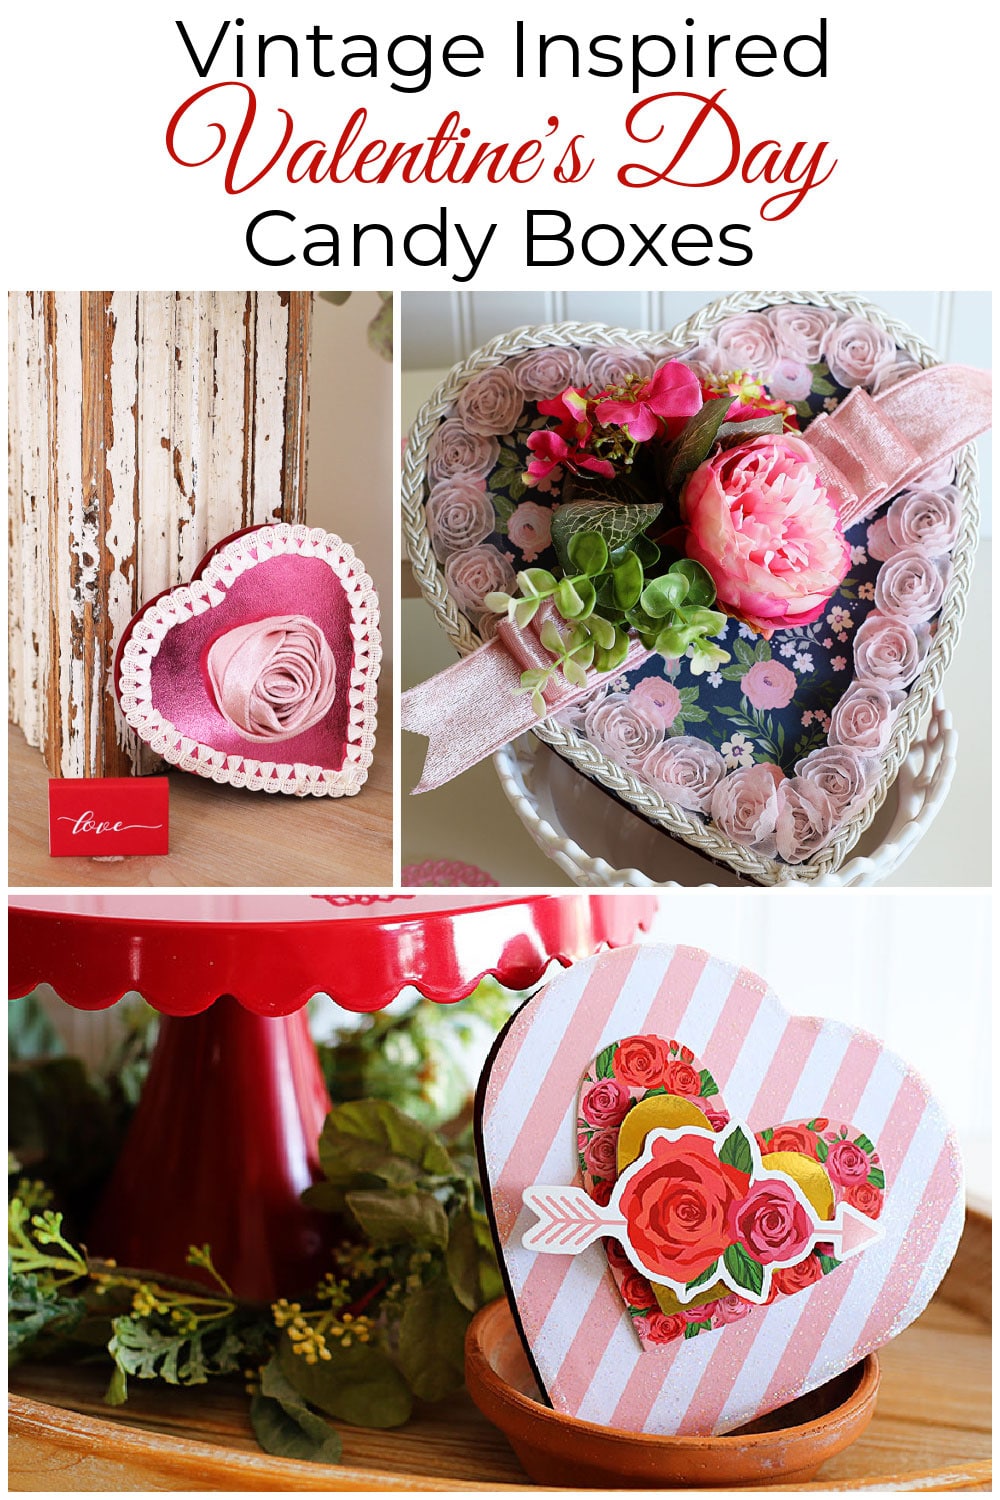 Whether giving these as gifts or using them for Valentine's Day decorations, these cute DIY vintage-inspired Valentine candy boxes are a fun and easy craft project bringing back a bit of nostalgia to candy giving.